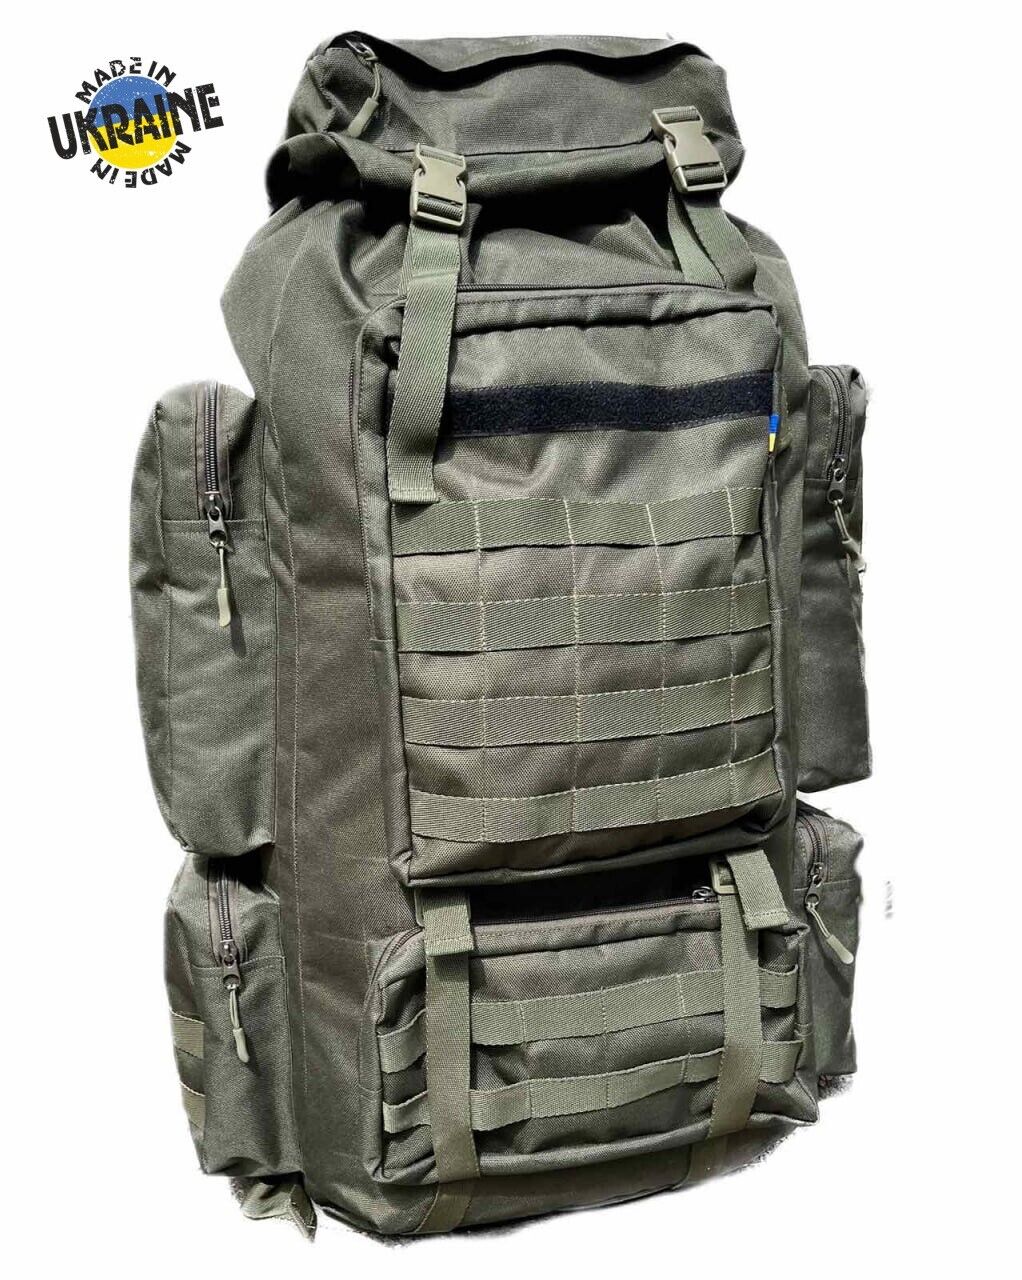 110 L Ukraine Tactical backpack olive military army backpac in Ukraine 2022.